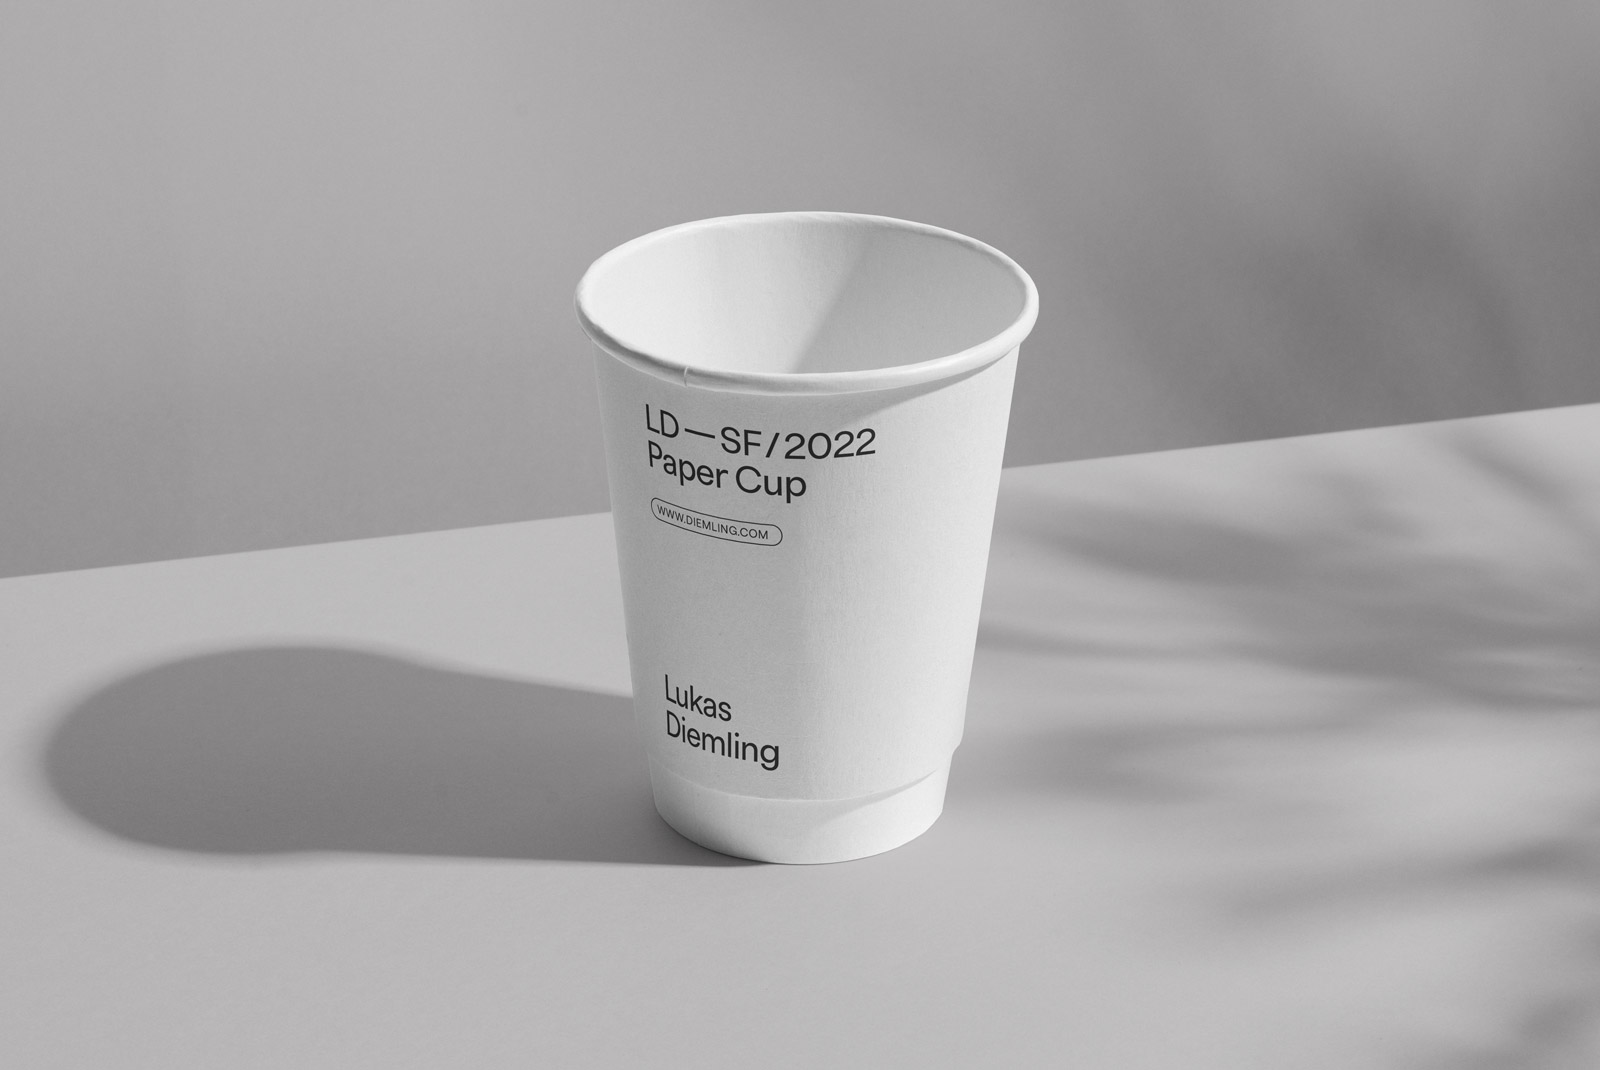 https://supply.family/wp-content/uploads/2022/07/01_Paper-Cup-01-Mockup-Lukas-Diemling.jpg